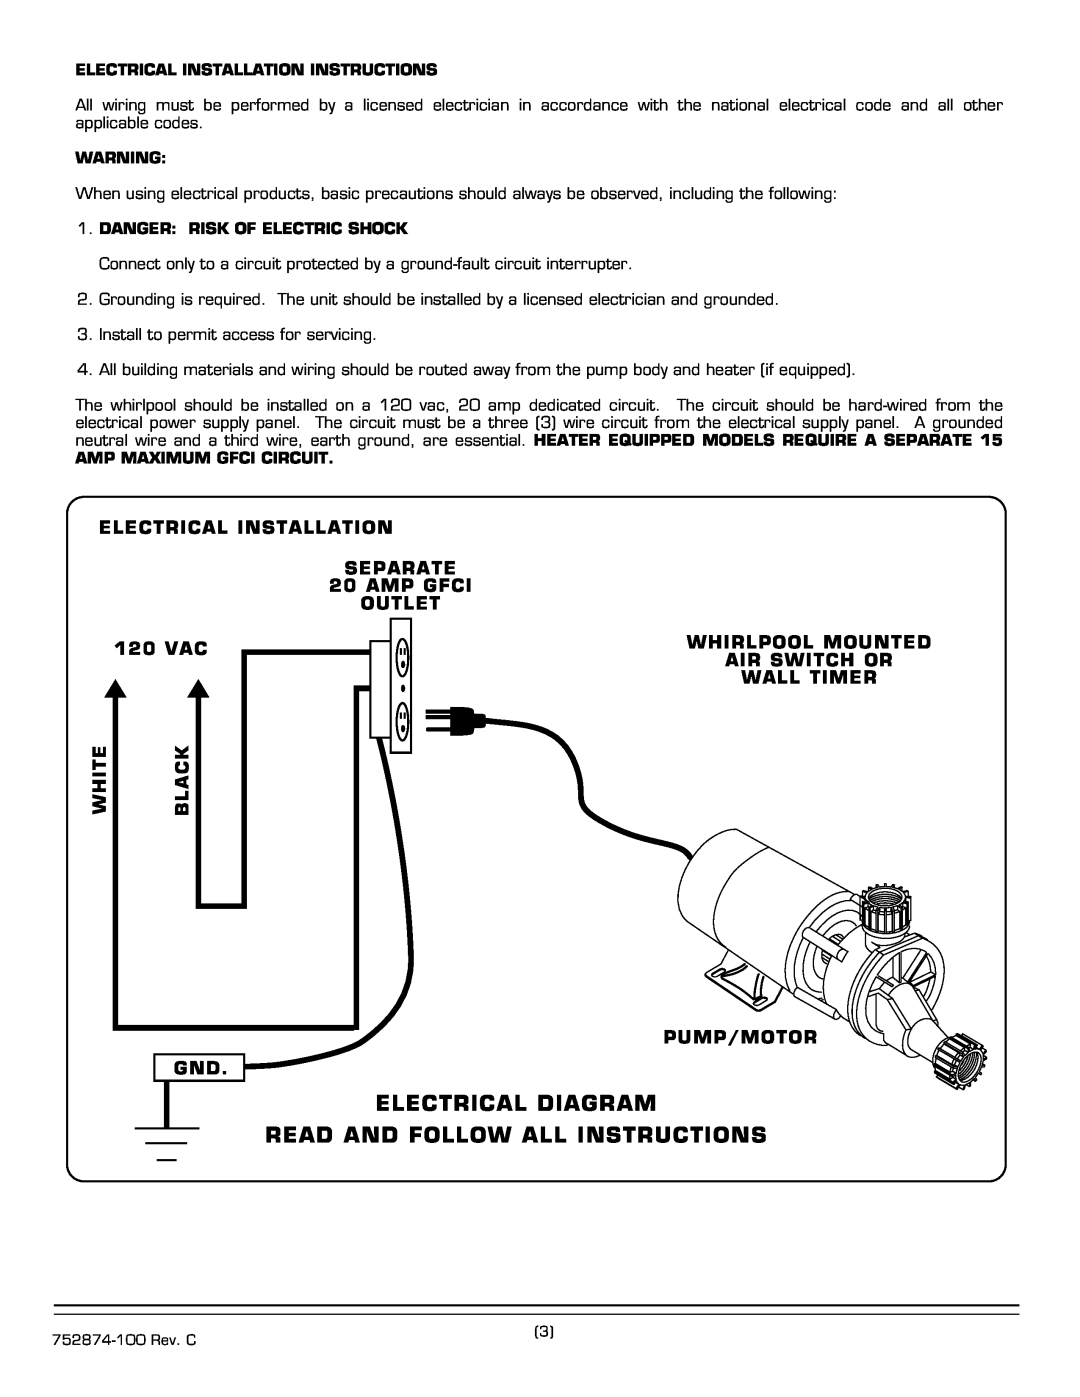 American Standard 2775E SERIES installation instructions Electrical Diagram, Read And Follow All Instructions 